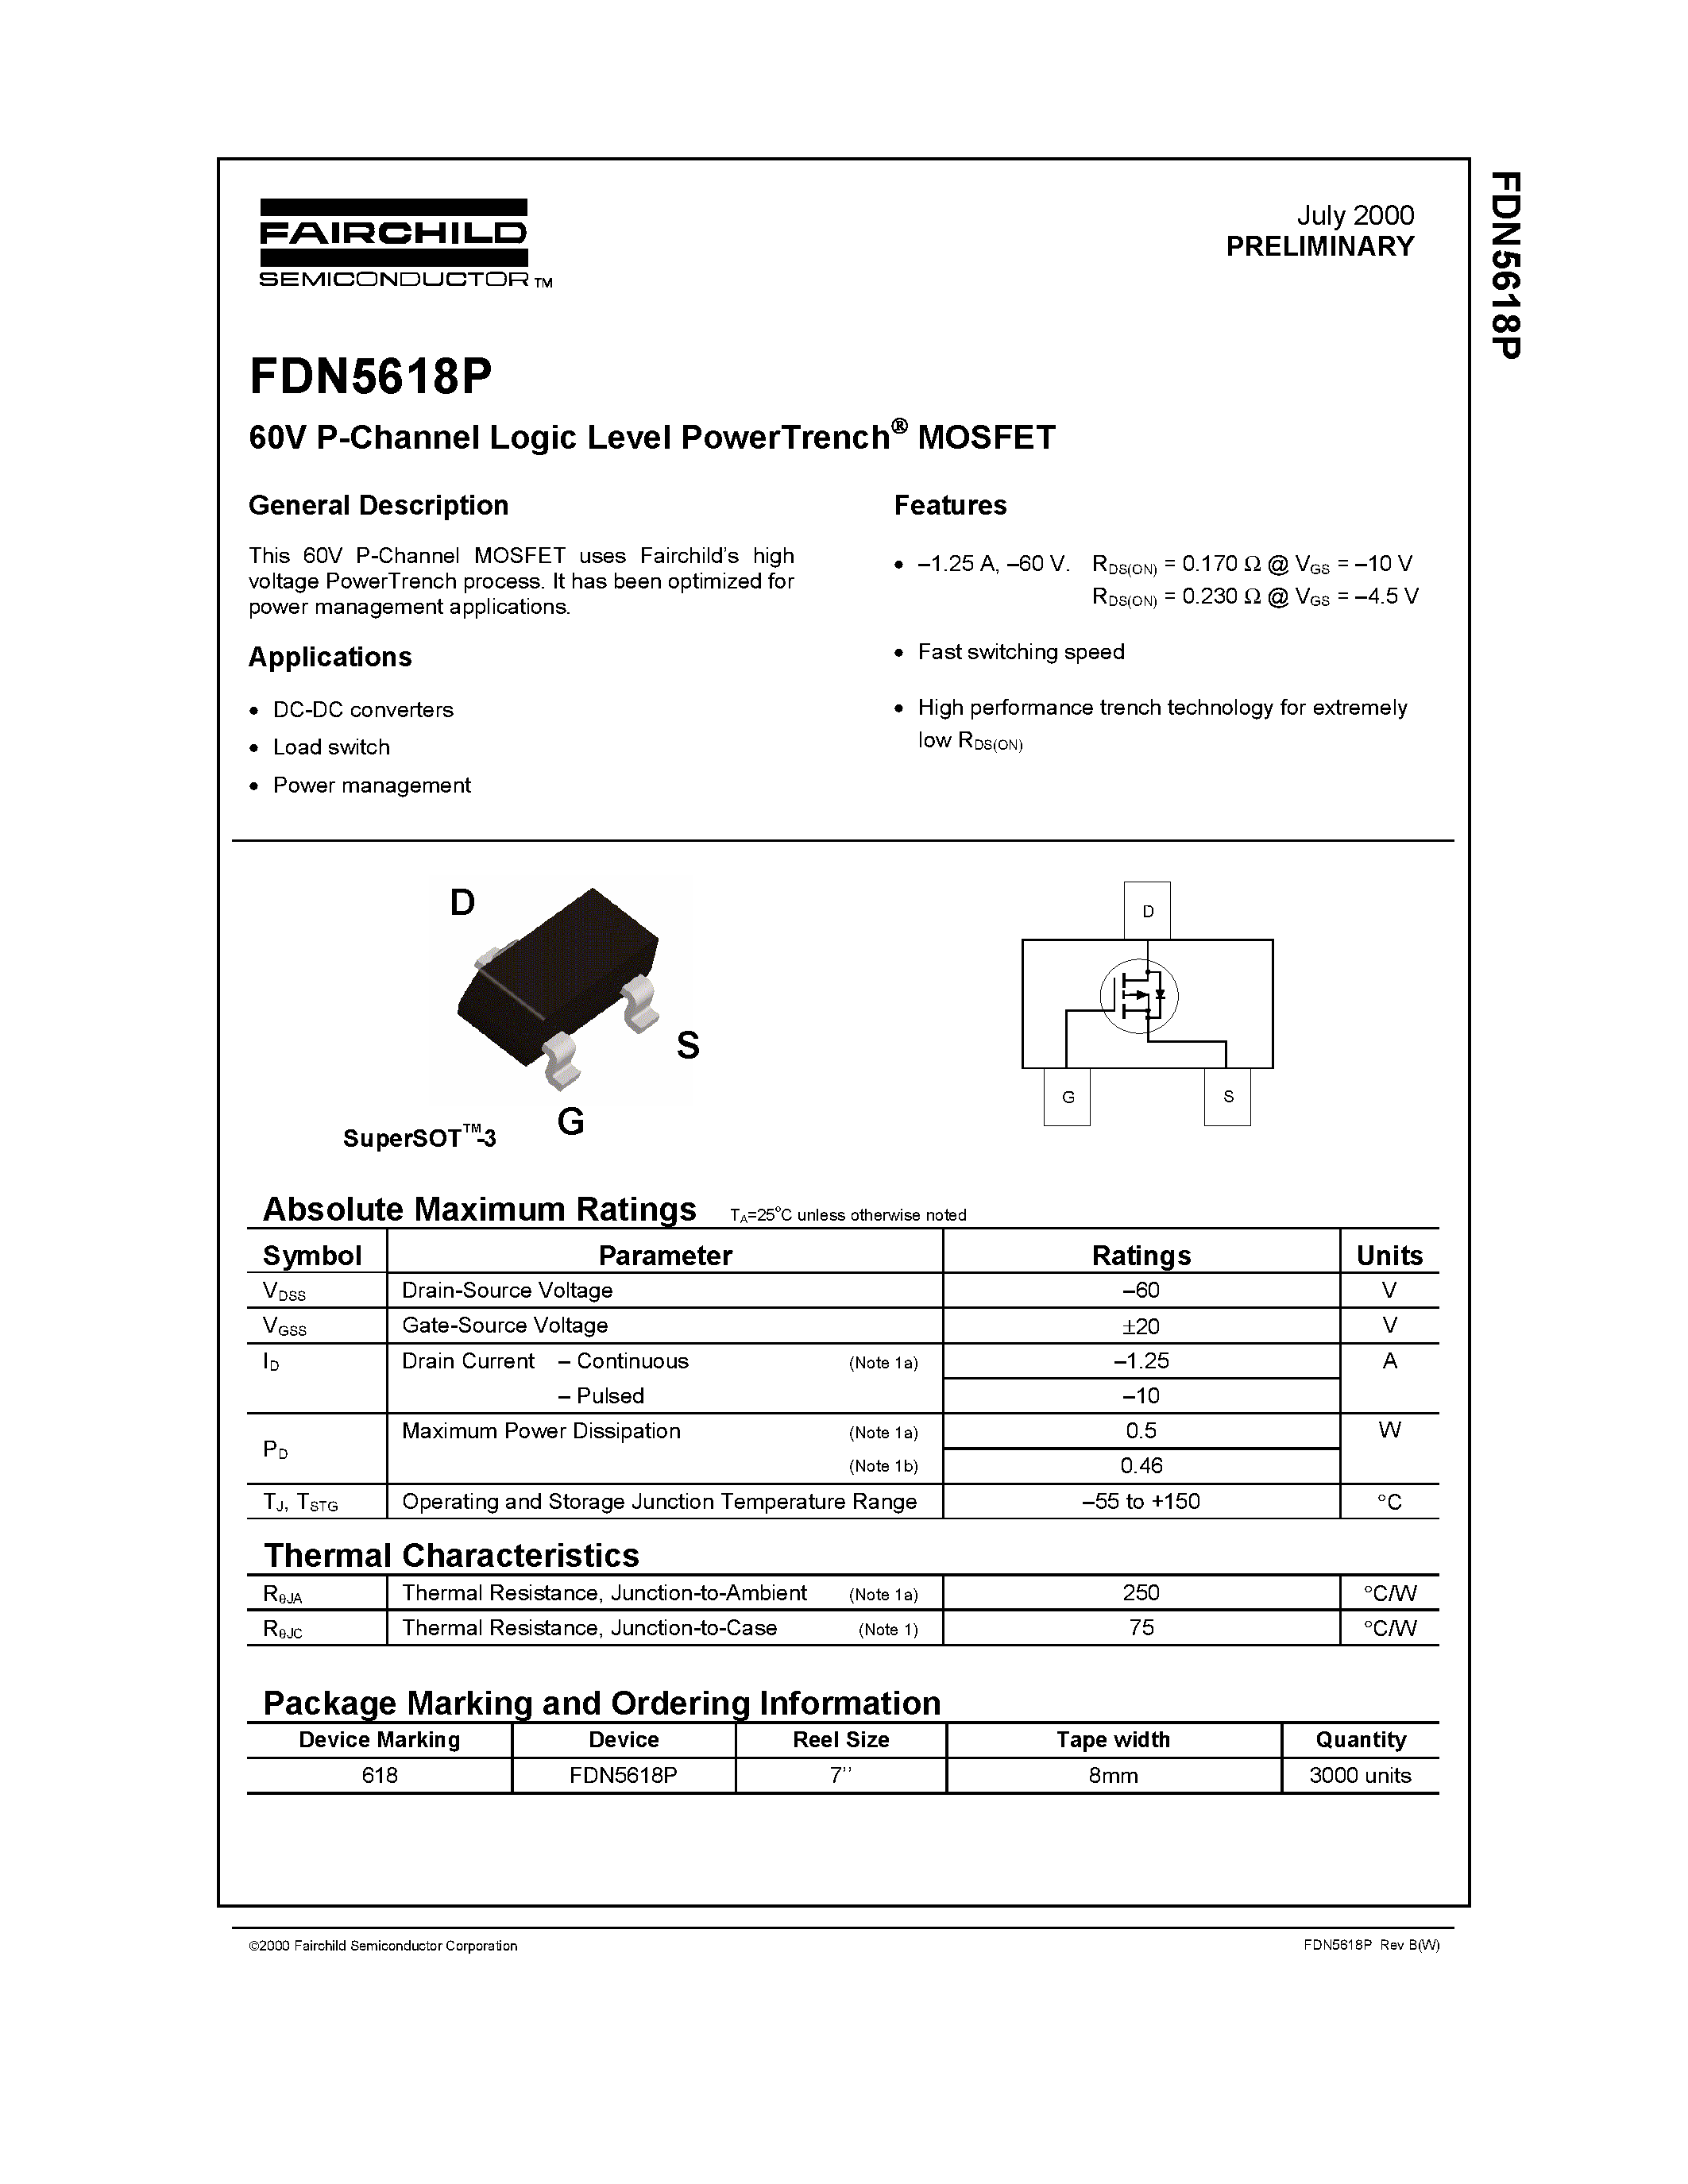 Даташит FDN5618P-60V P-Channel Logic Level PowerTrench MOSFET страница 1